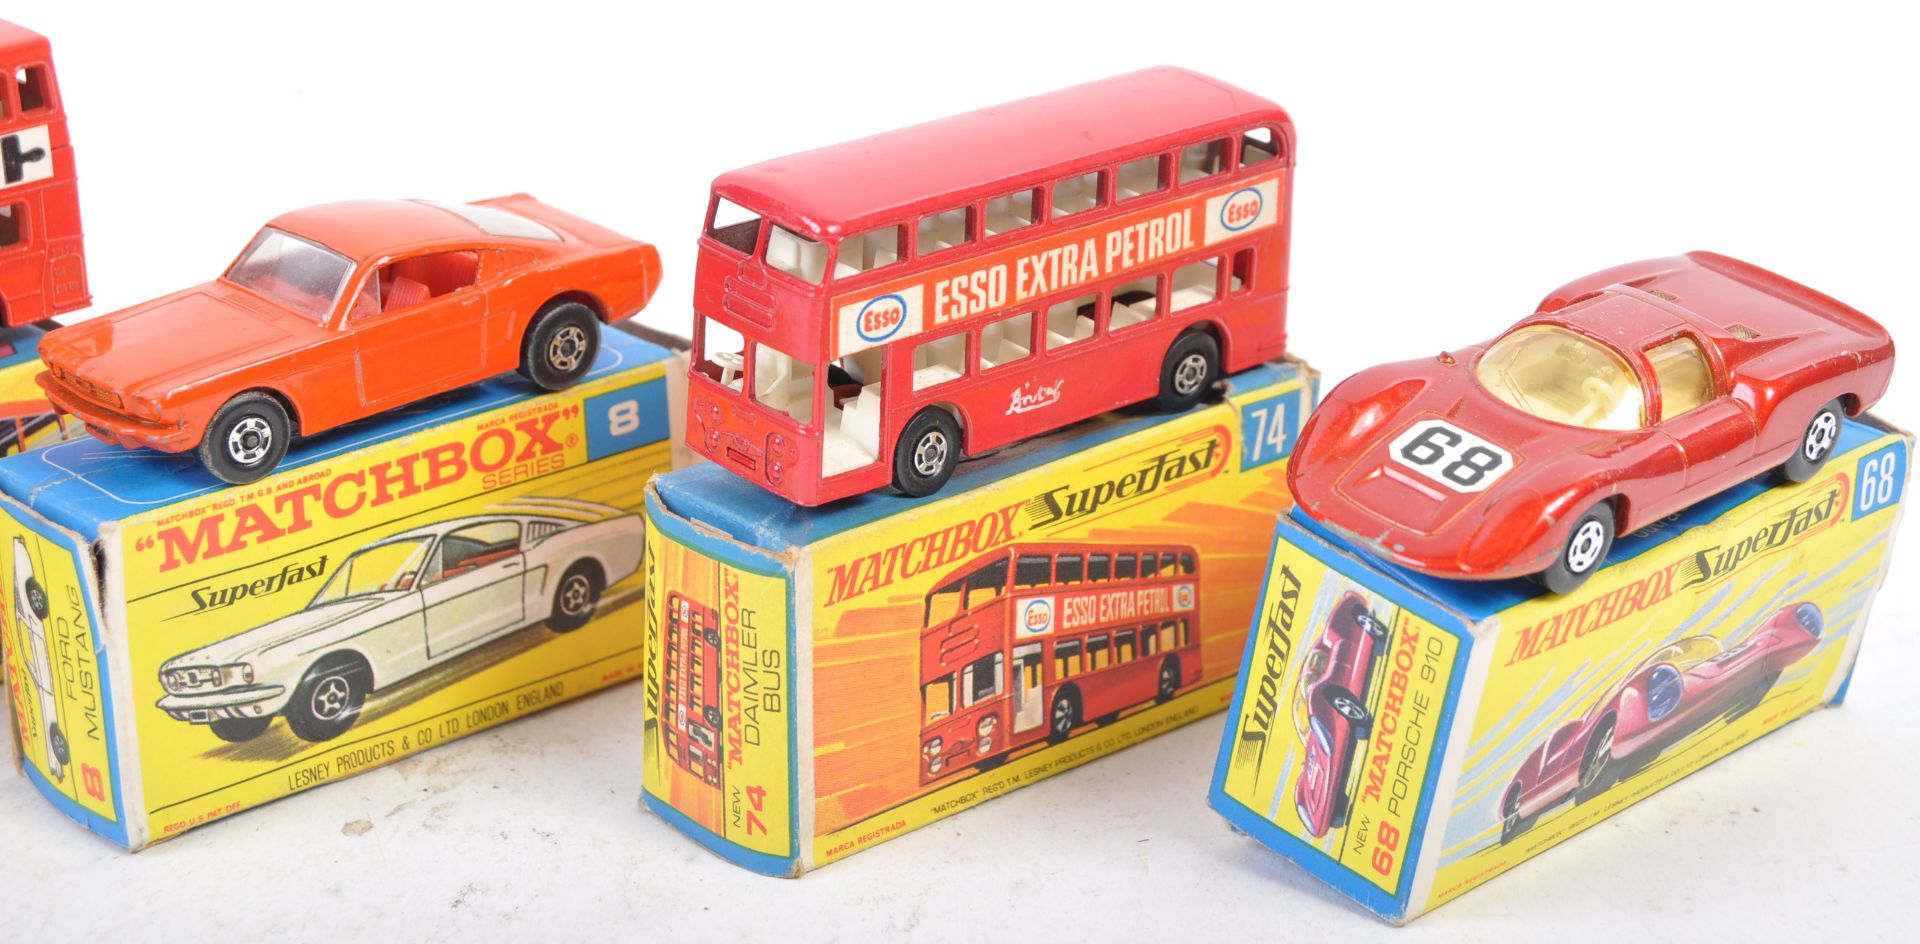 COLLECTION OF VINTAGE MATCHBOX SUPERFAST BOXED DIECAST MODELS - Image 2 of 4